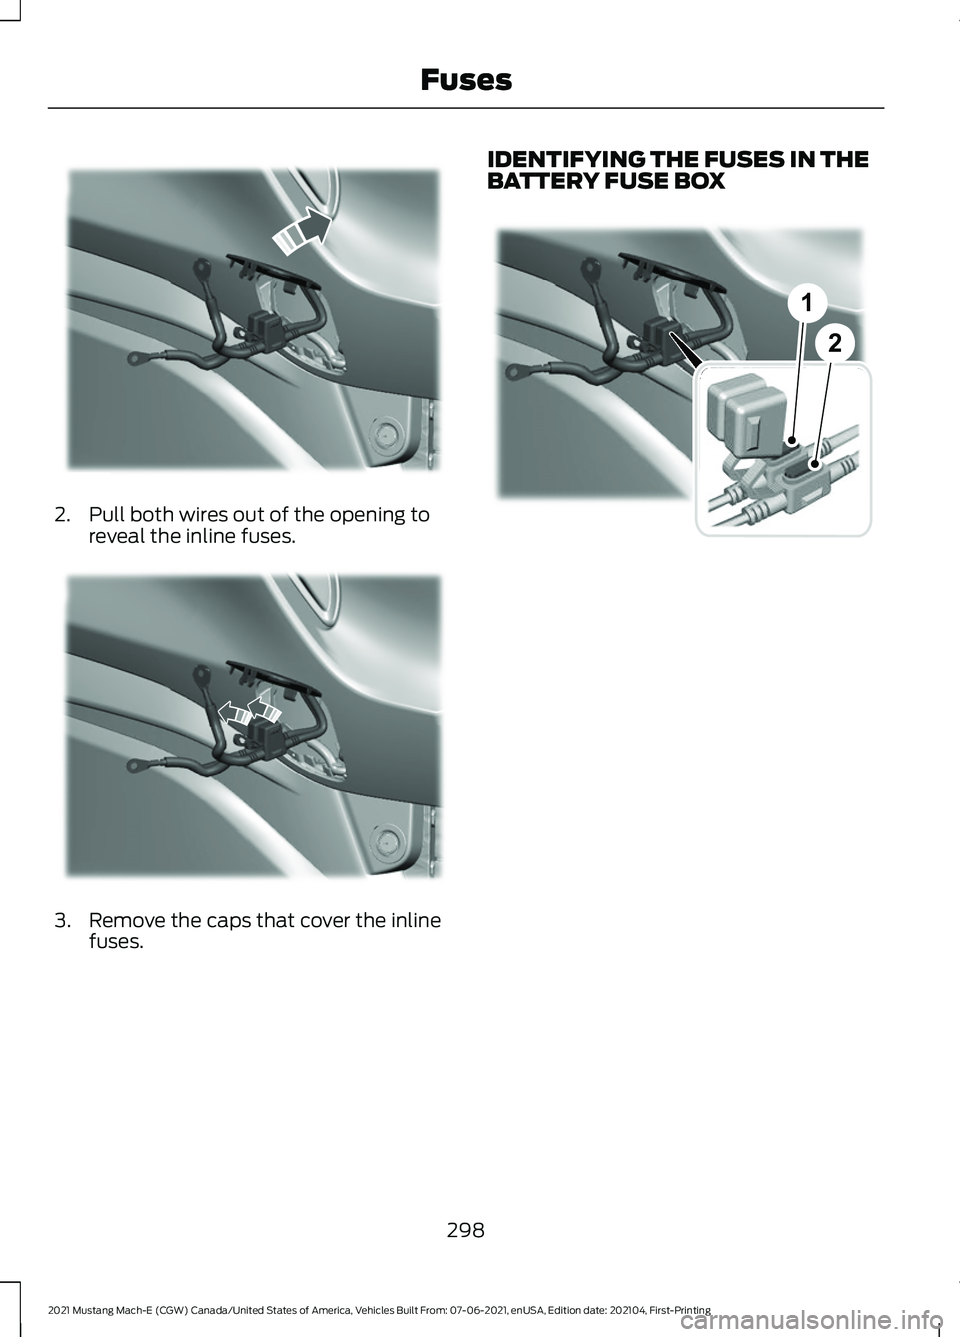 FORD MUSTANG MACH-E 2021  Owners Manual 2. Pull both wires out of the opening to
reveal the inline fuses. 3. Remove the caps that cover the inline
fuses. IDENTIFYING THE FUSES IN THE
BATTERY FUSE BOX
298
2021 Mustang Mach-E (CGW) Canada/Uni